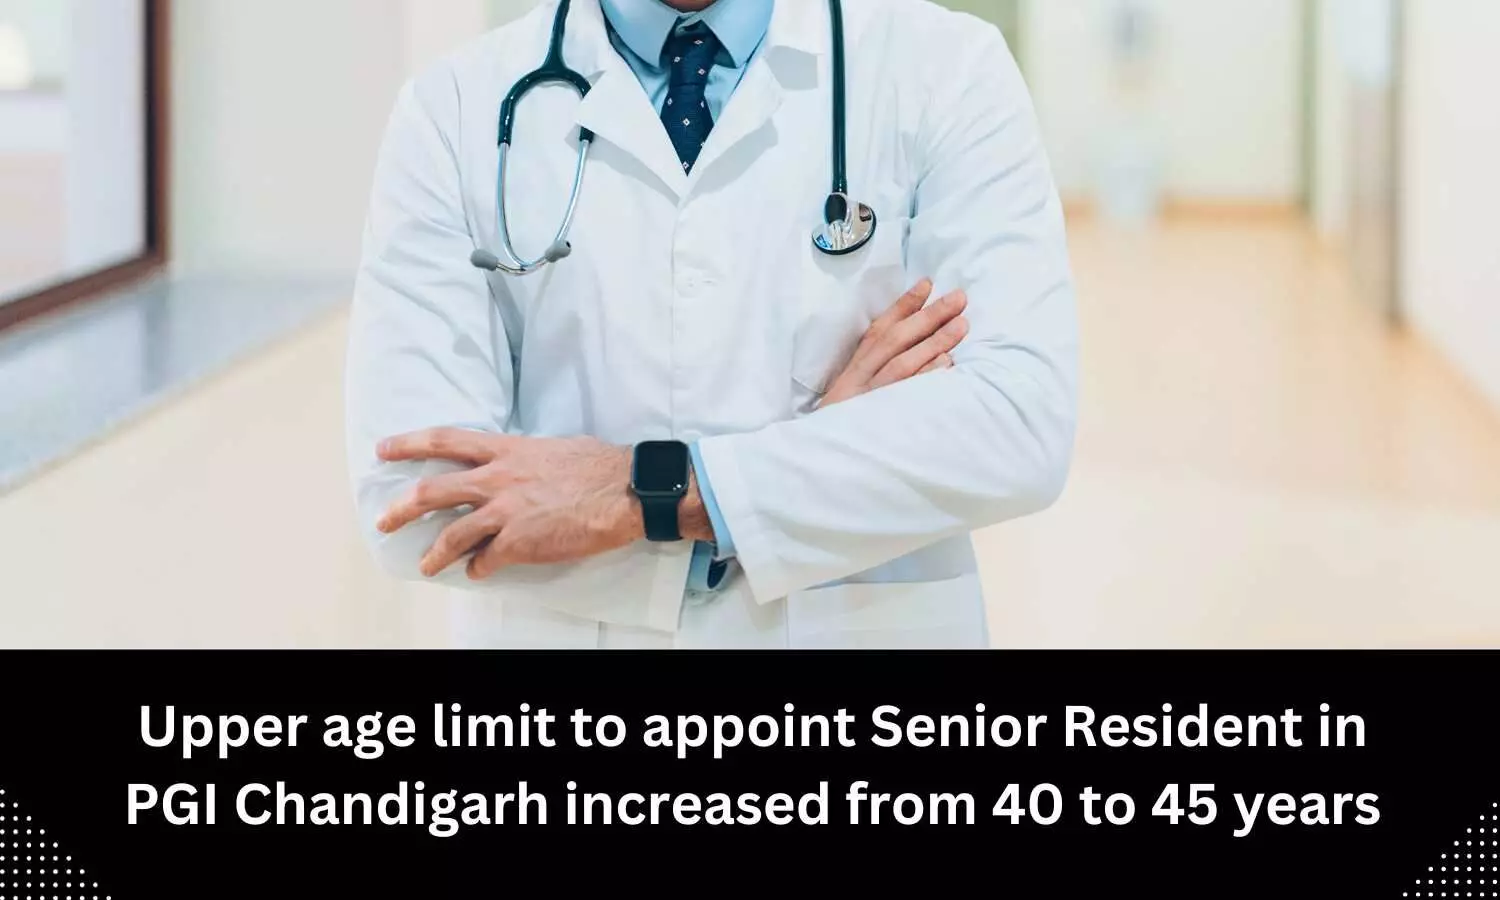 PGIMER increases upper age limit to appoint senior residents from 40 to 45 years